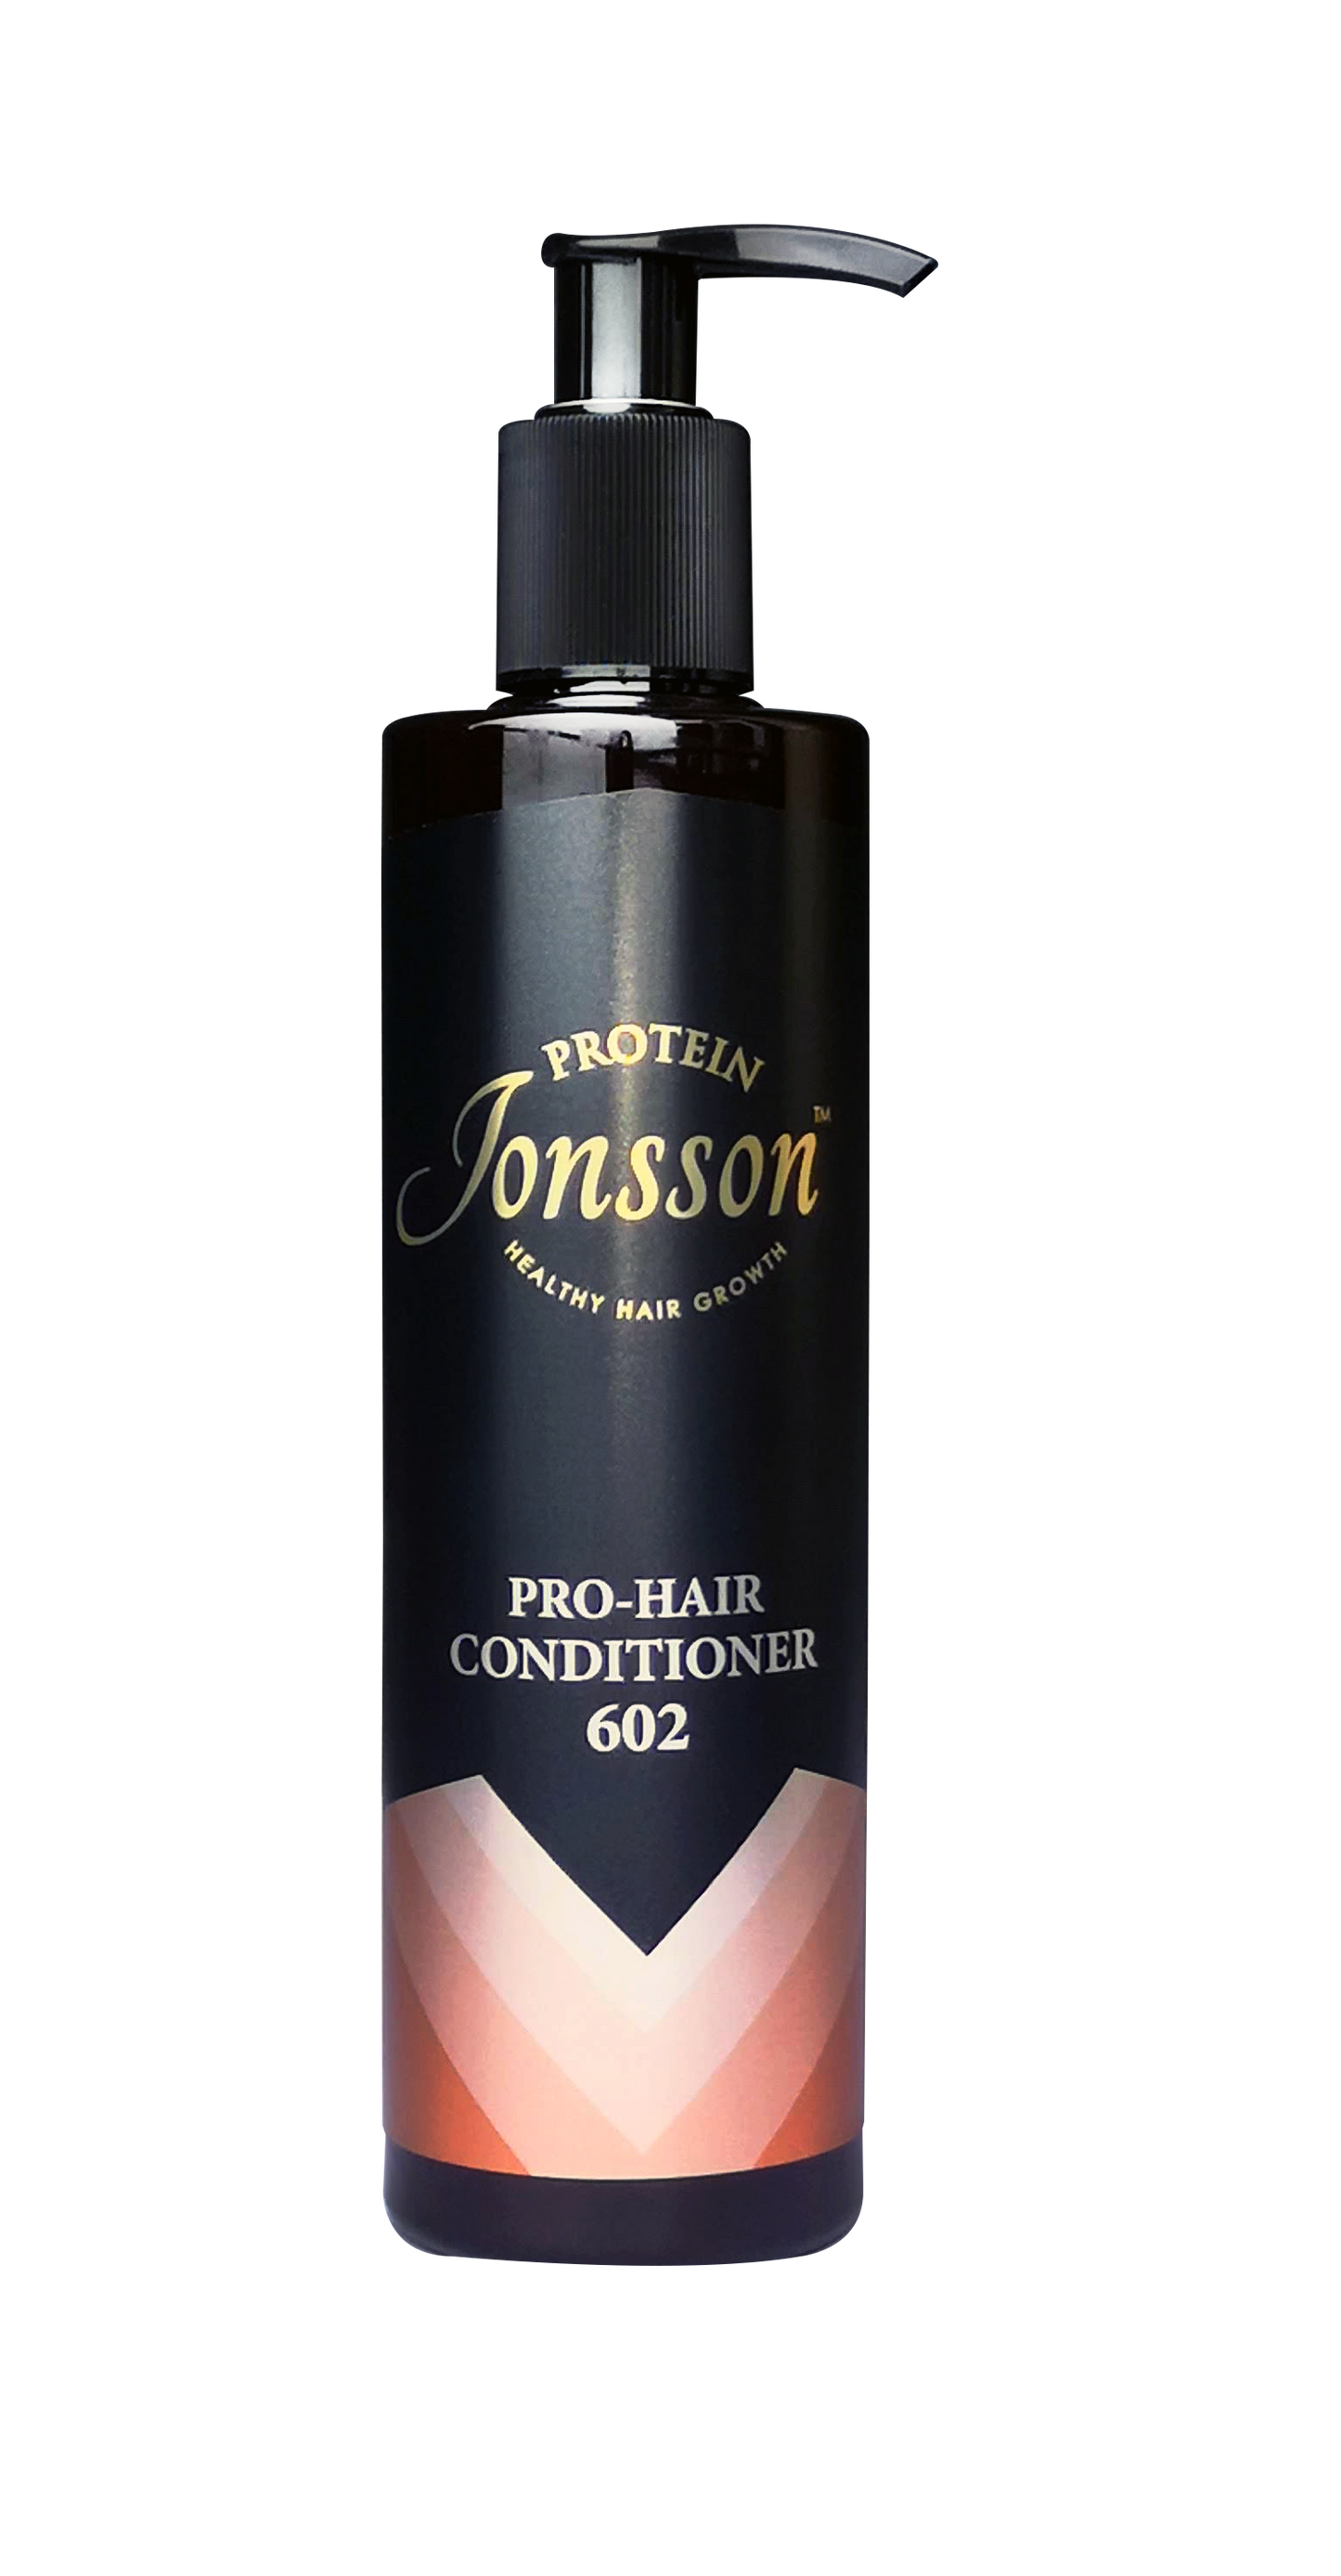 PRO-HAIR CONDITIONER 602 290ML [JS602S-1] All scalp & hair types